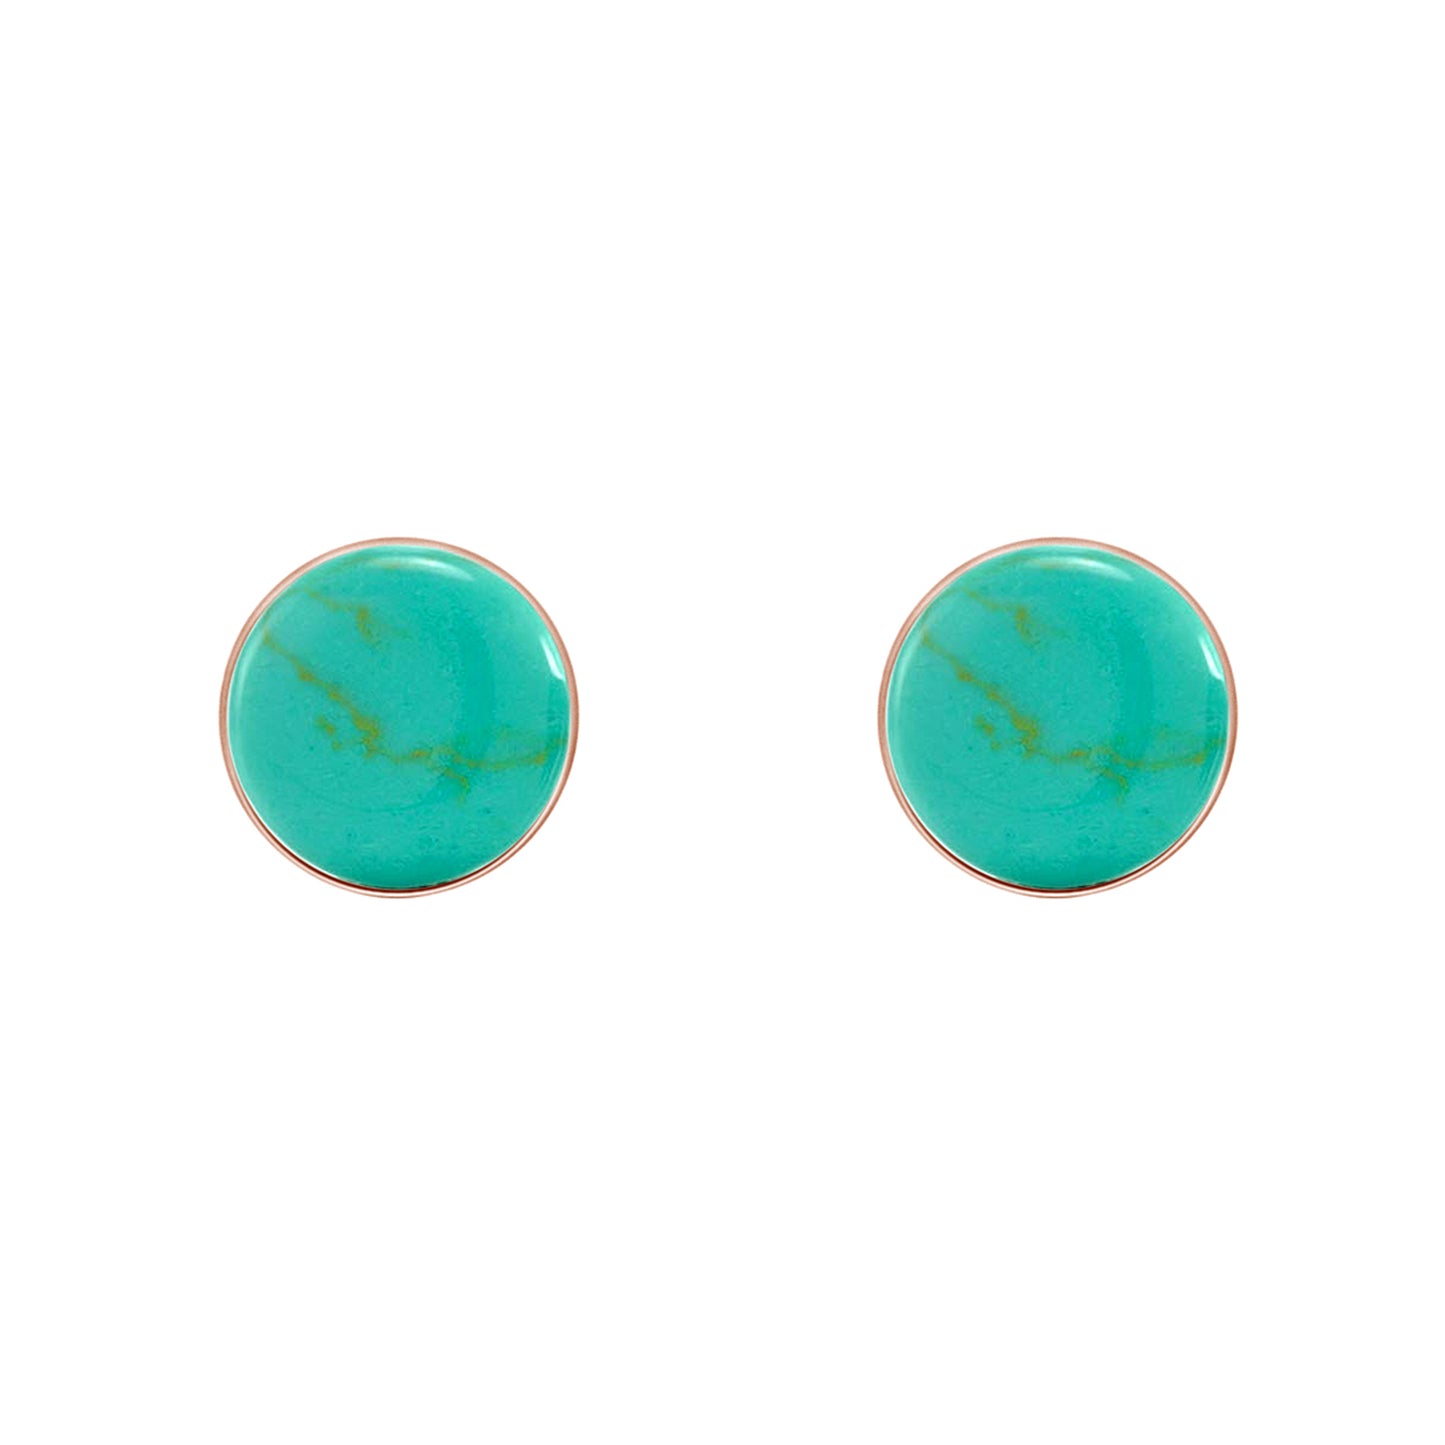 Bezel Set Turquoise Round Dome Button Stud Earrings In 14k Gold Over Sterling Silver For Women Gift For Her